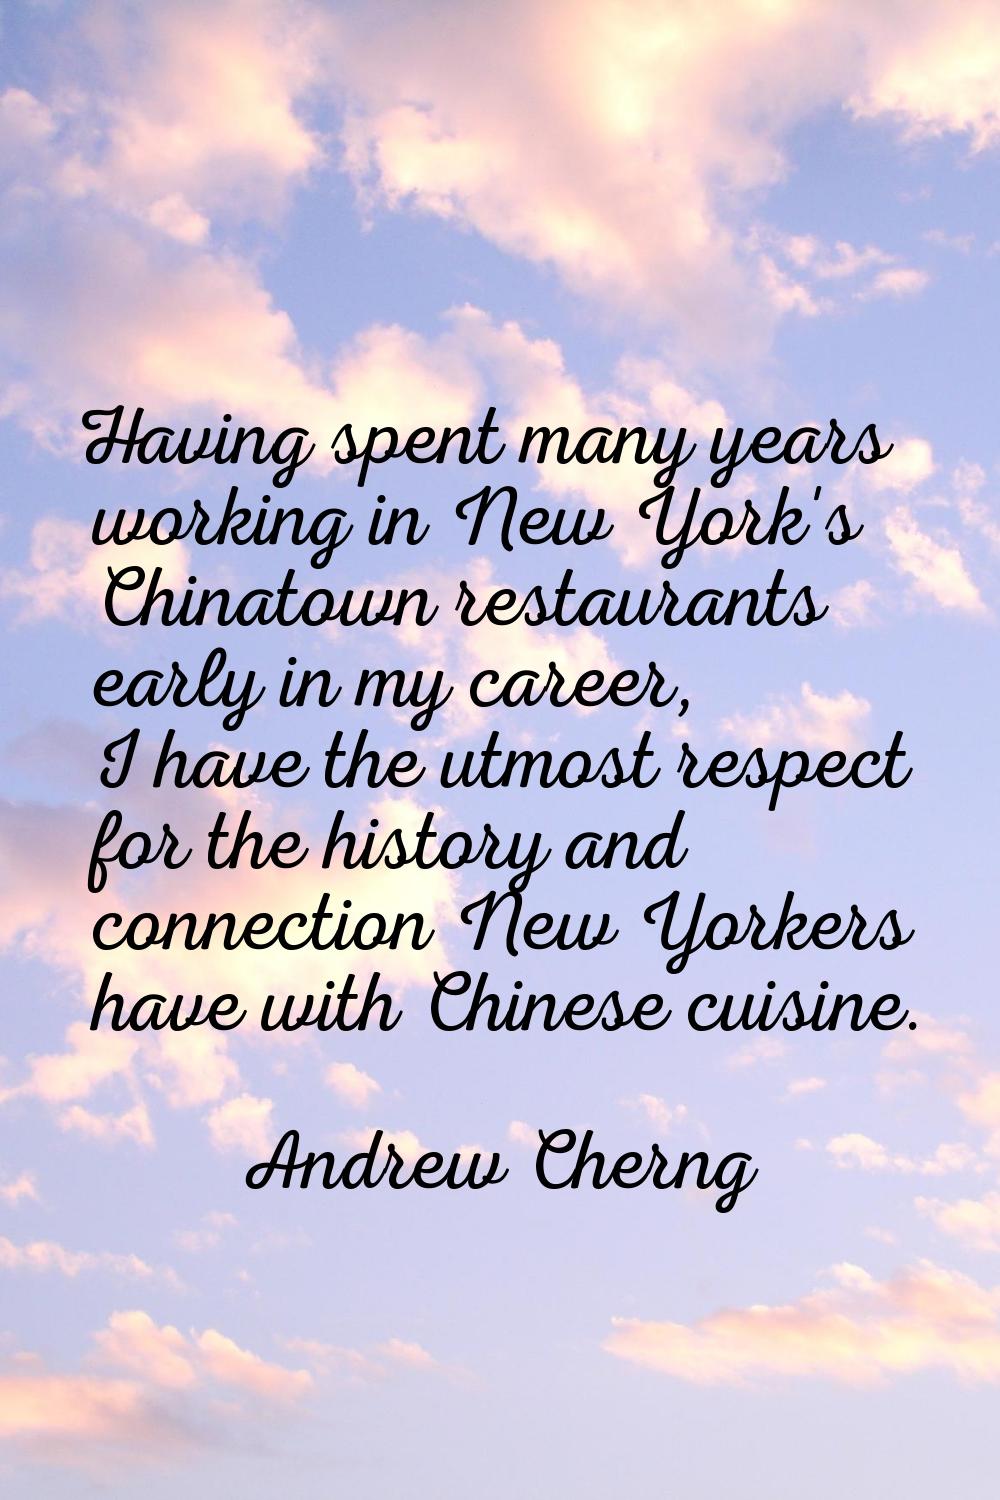 Having spent many years working in New York's Chinatown restaurants early in my career, I have the 